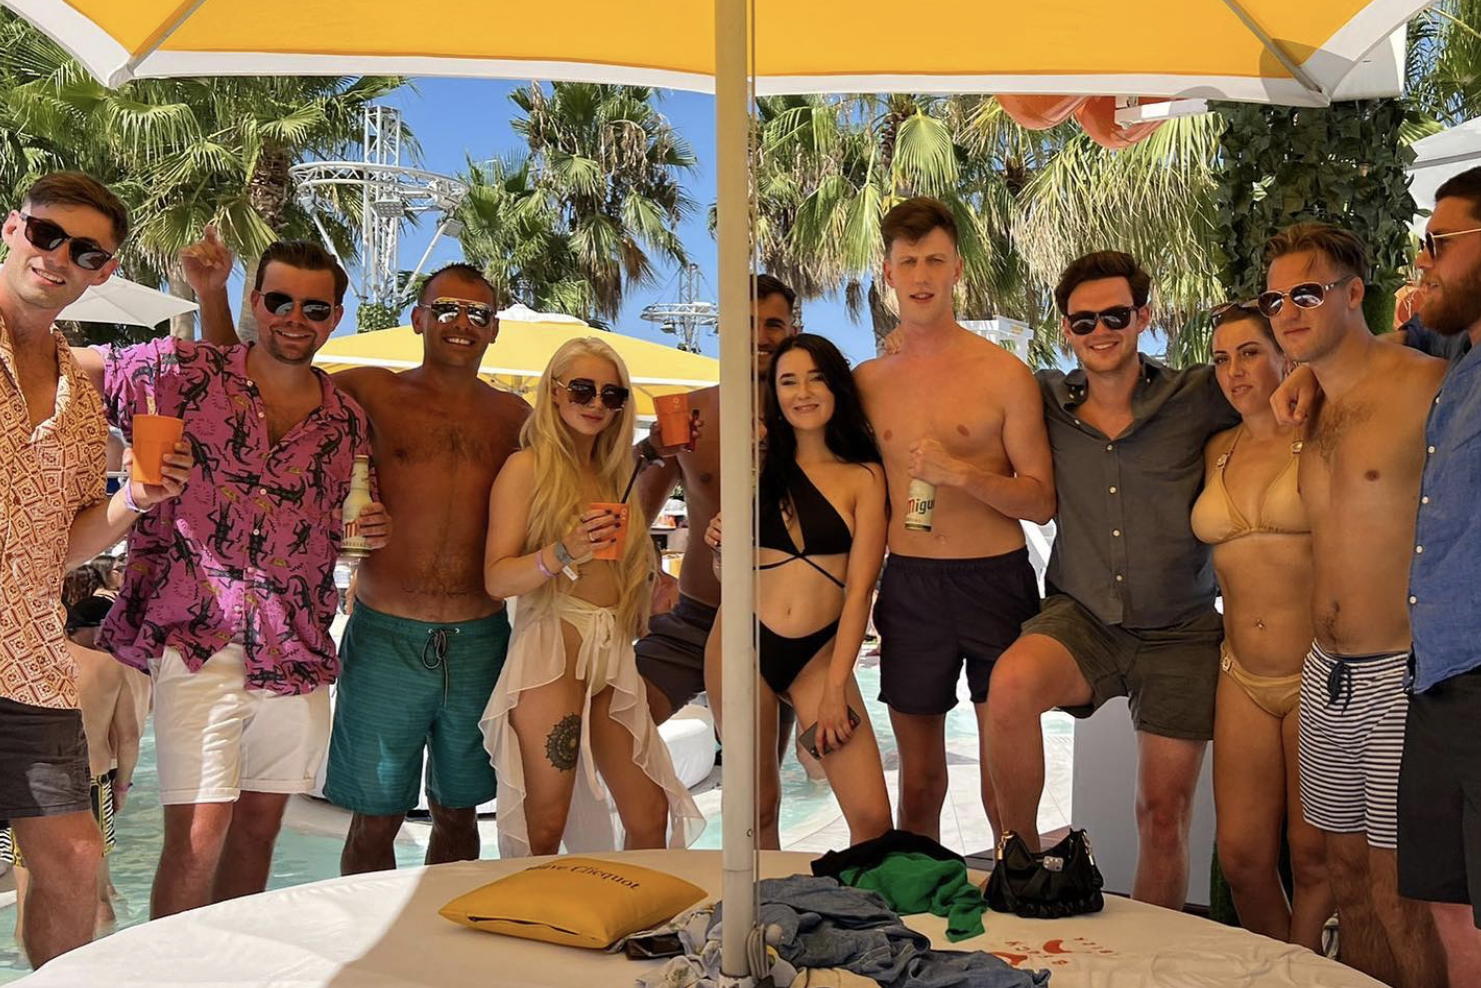 The team chilling out together by the poolside in Ibiza